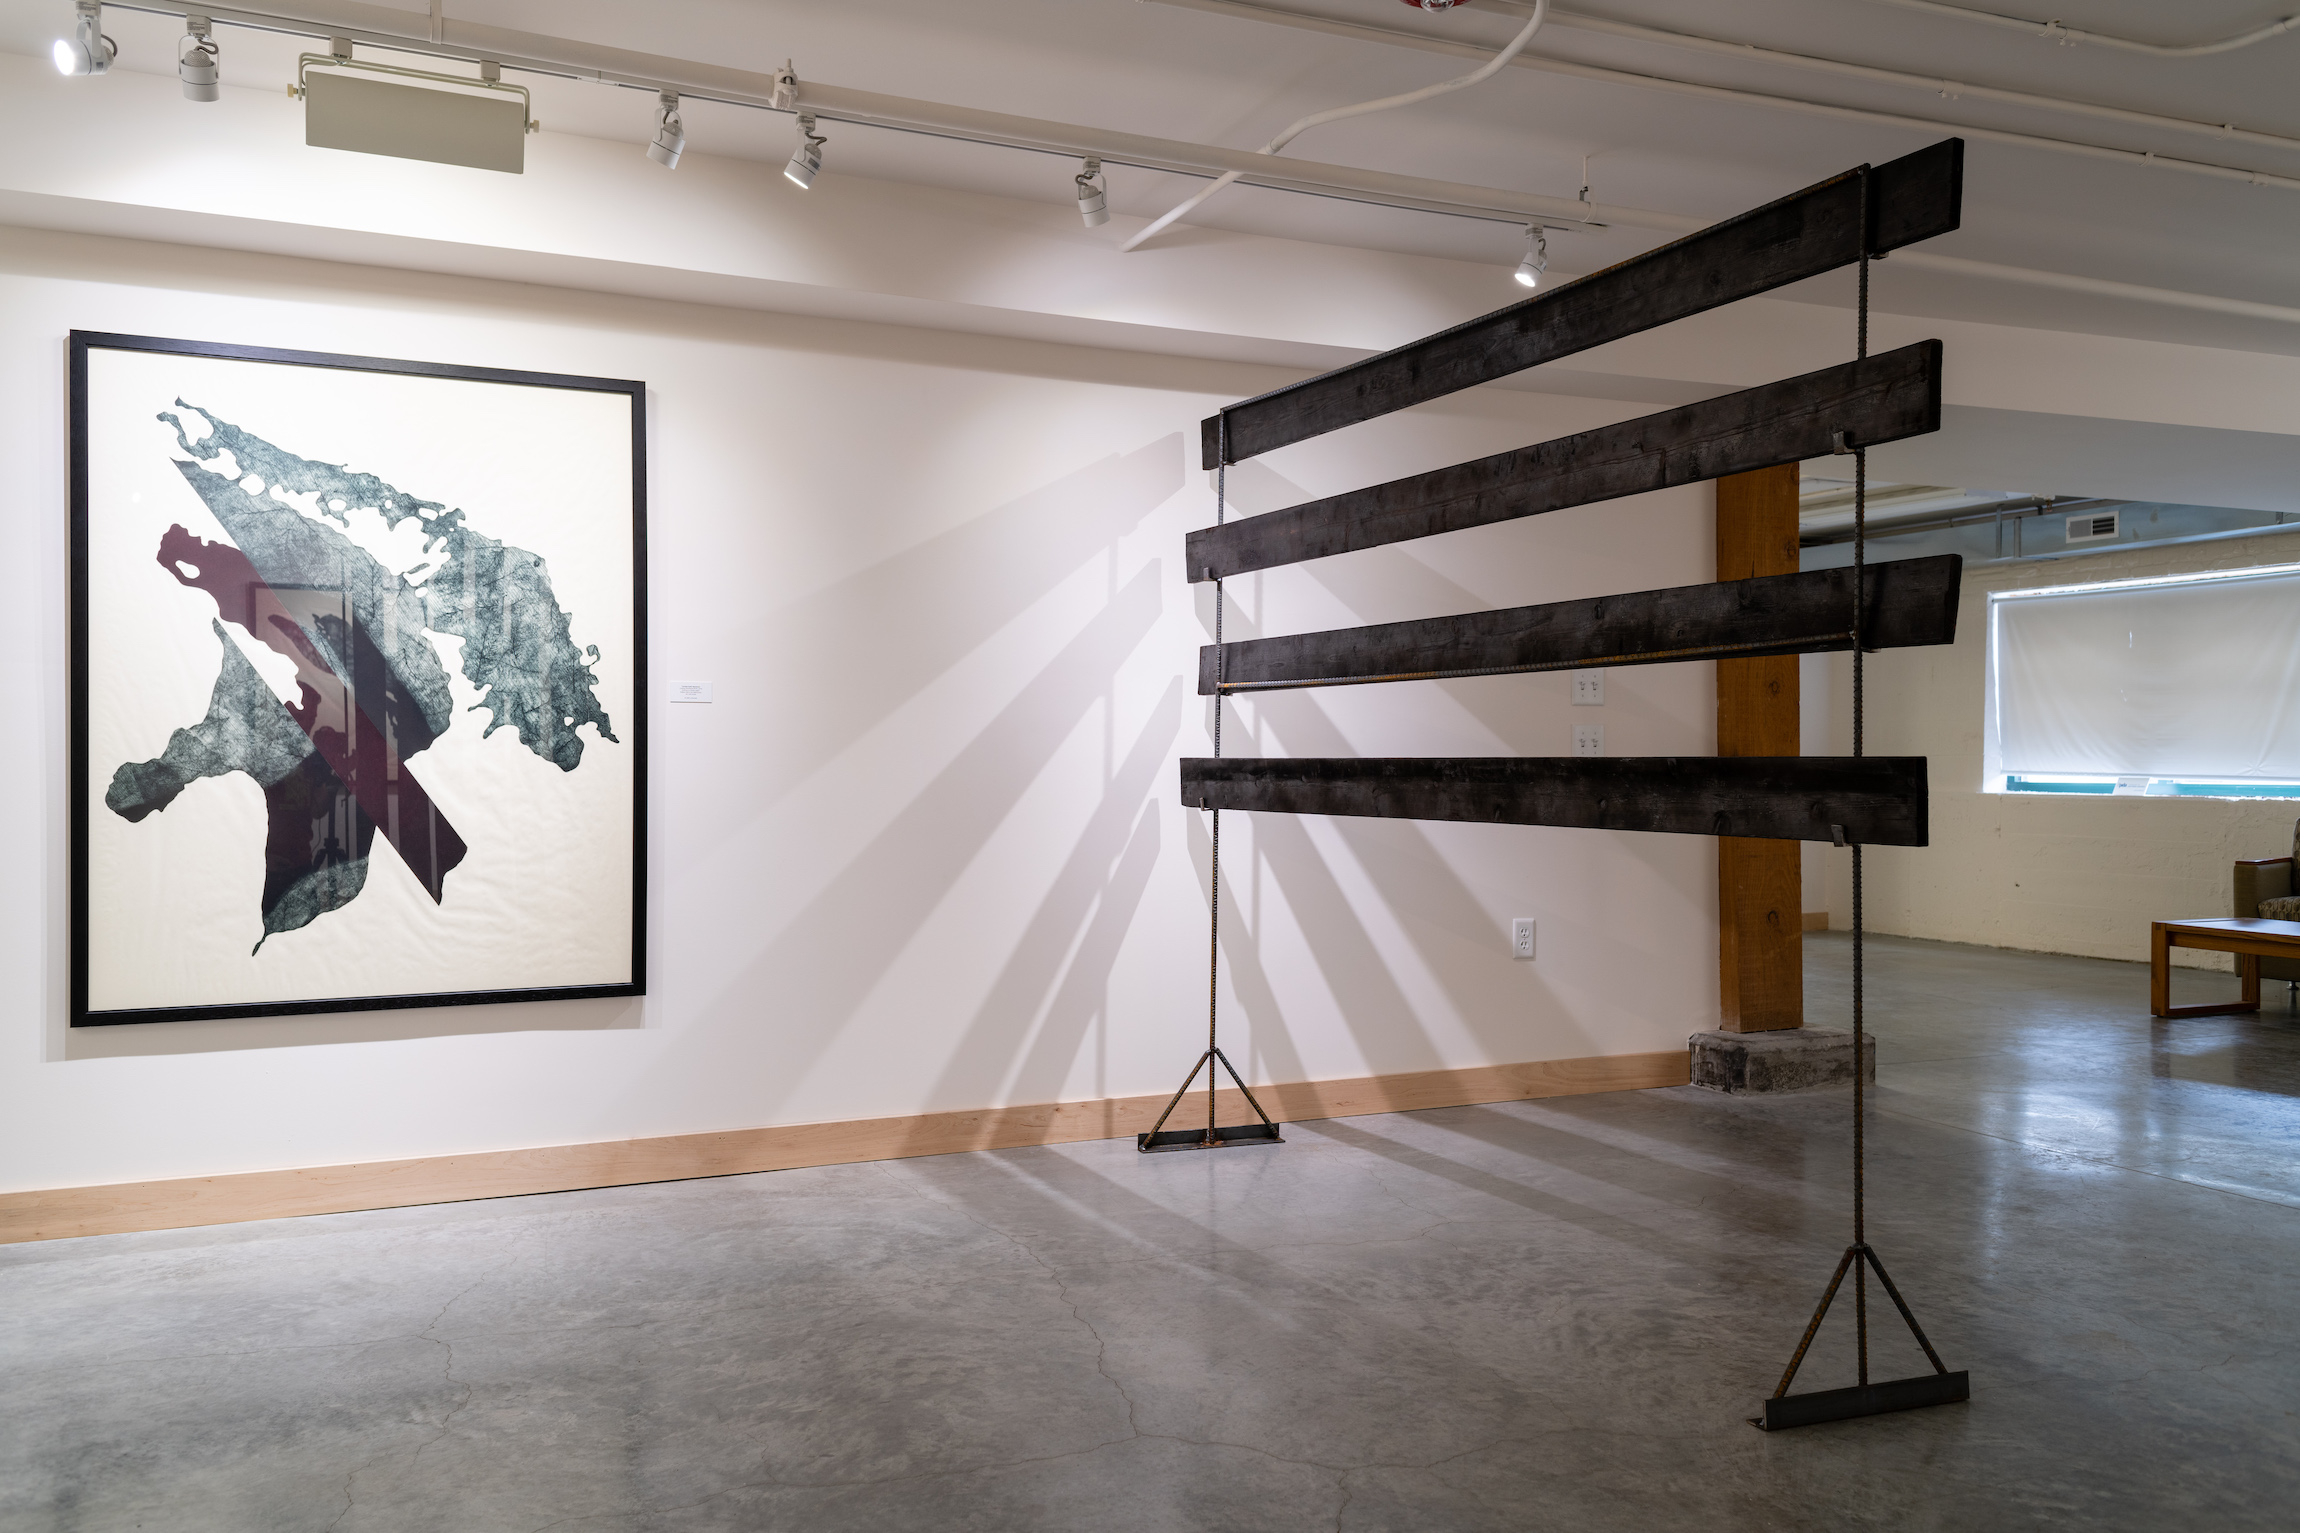 Installation view of Carissa Kalia Heinrichs' Master of Fine Arts exhibition As the Crow Flies at the Apex Gallery of Tandem Press, University of Wisconsin-Madison. Photography by Kyle Herrera.